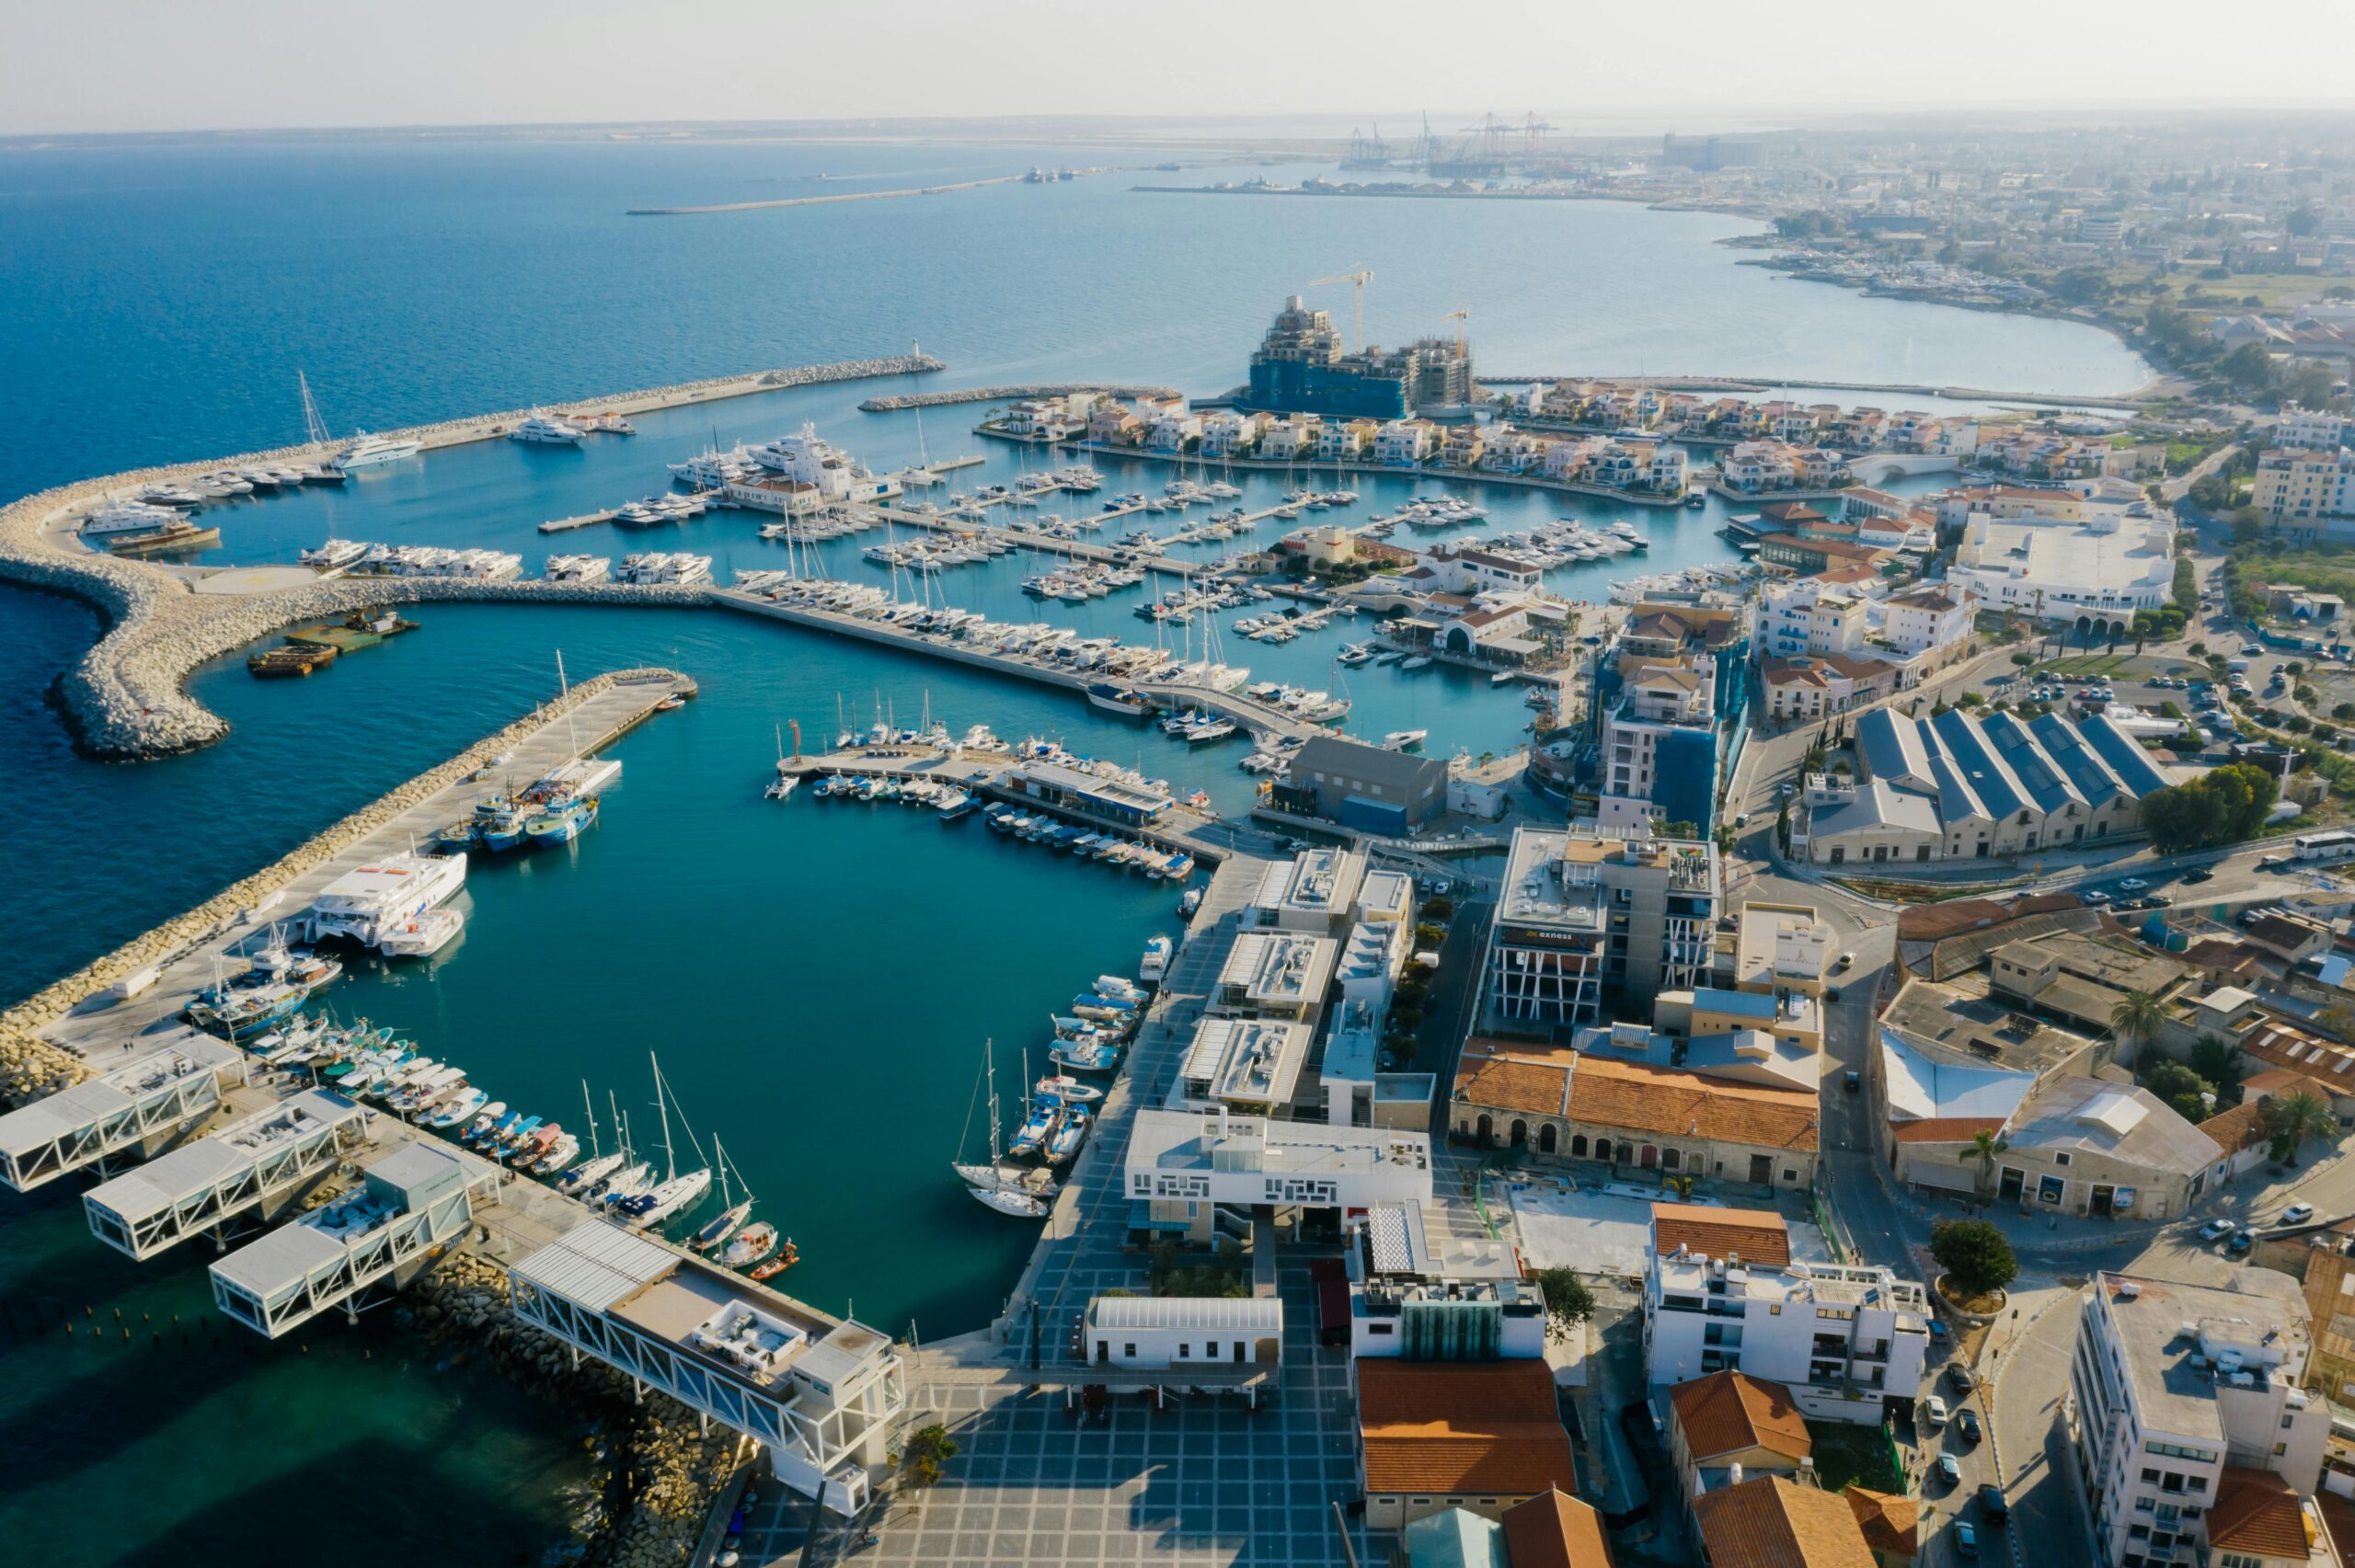 Aerial view of a marina and coastal town in Cyprus